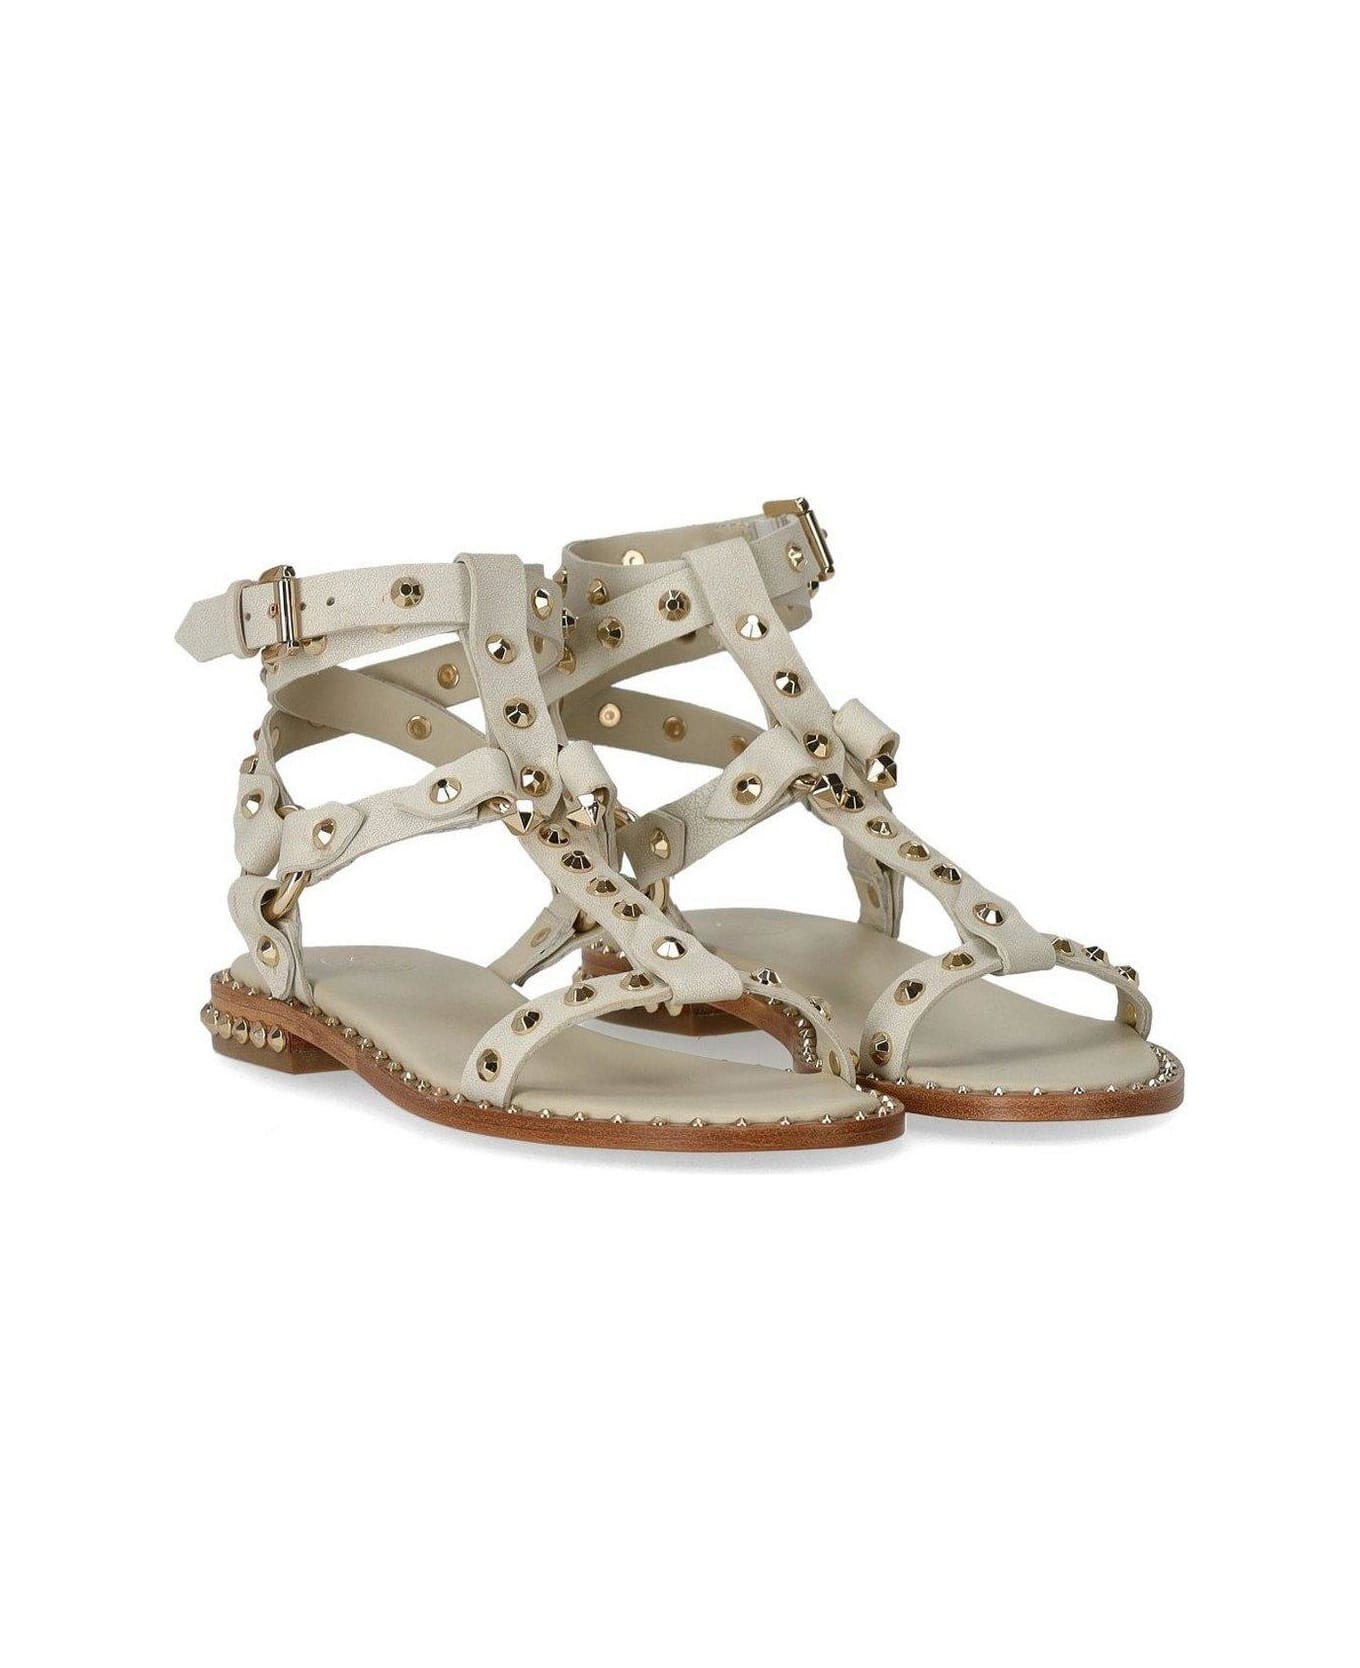 Ash Pulp Studded Ankle-strap Sandals - Panna サンダル